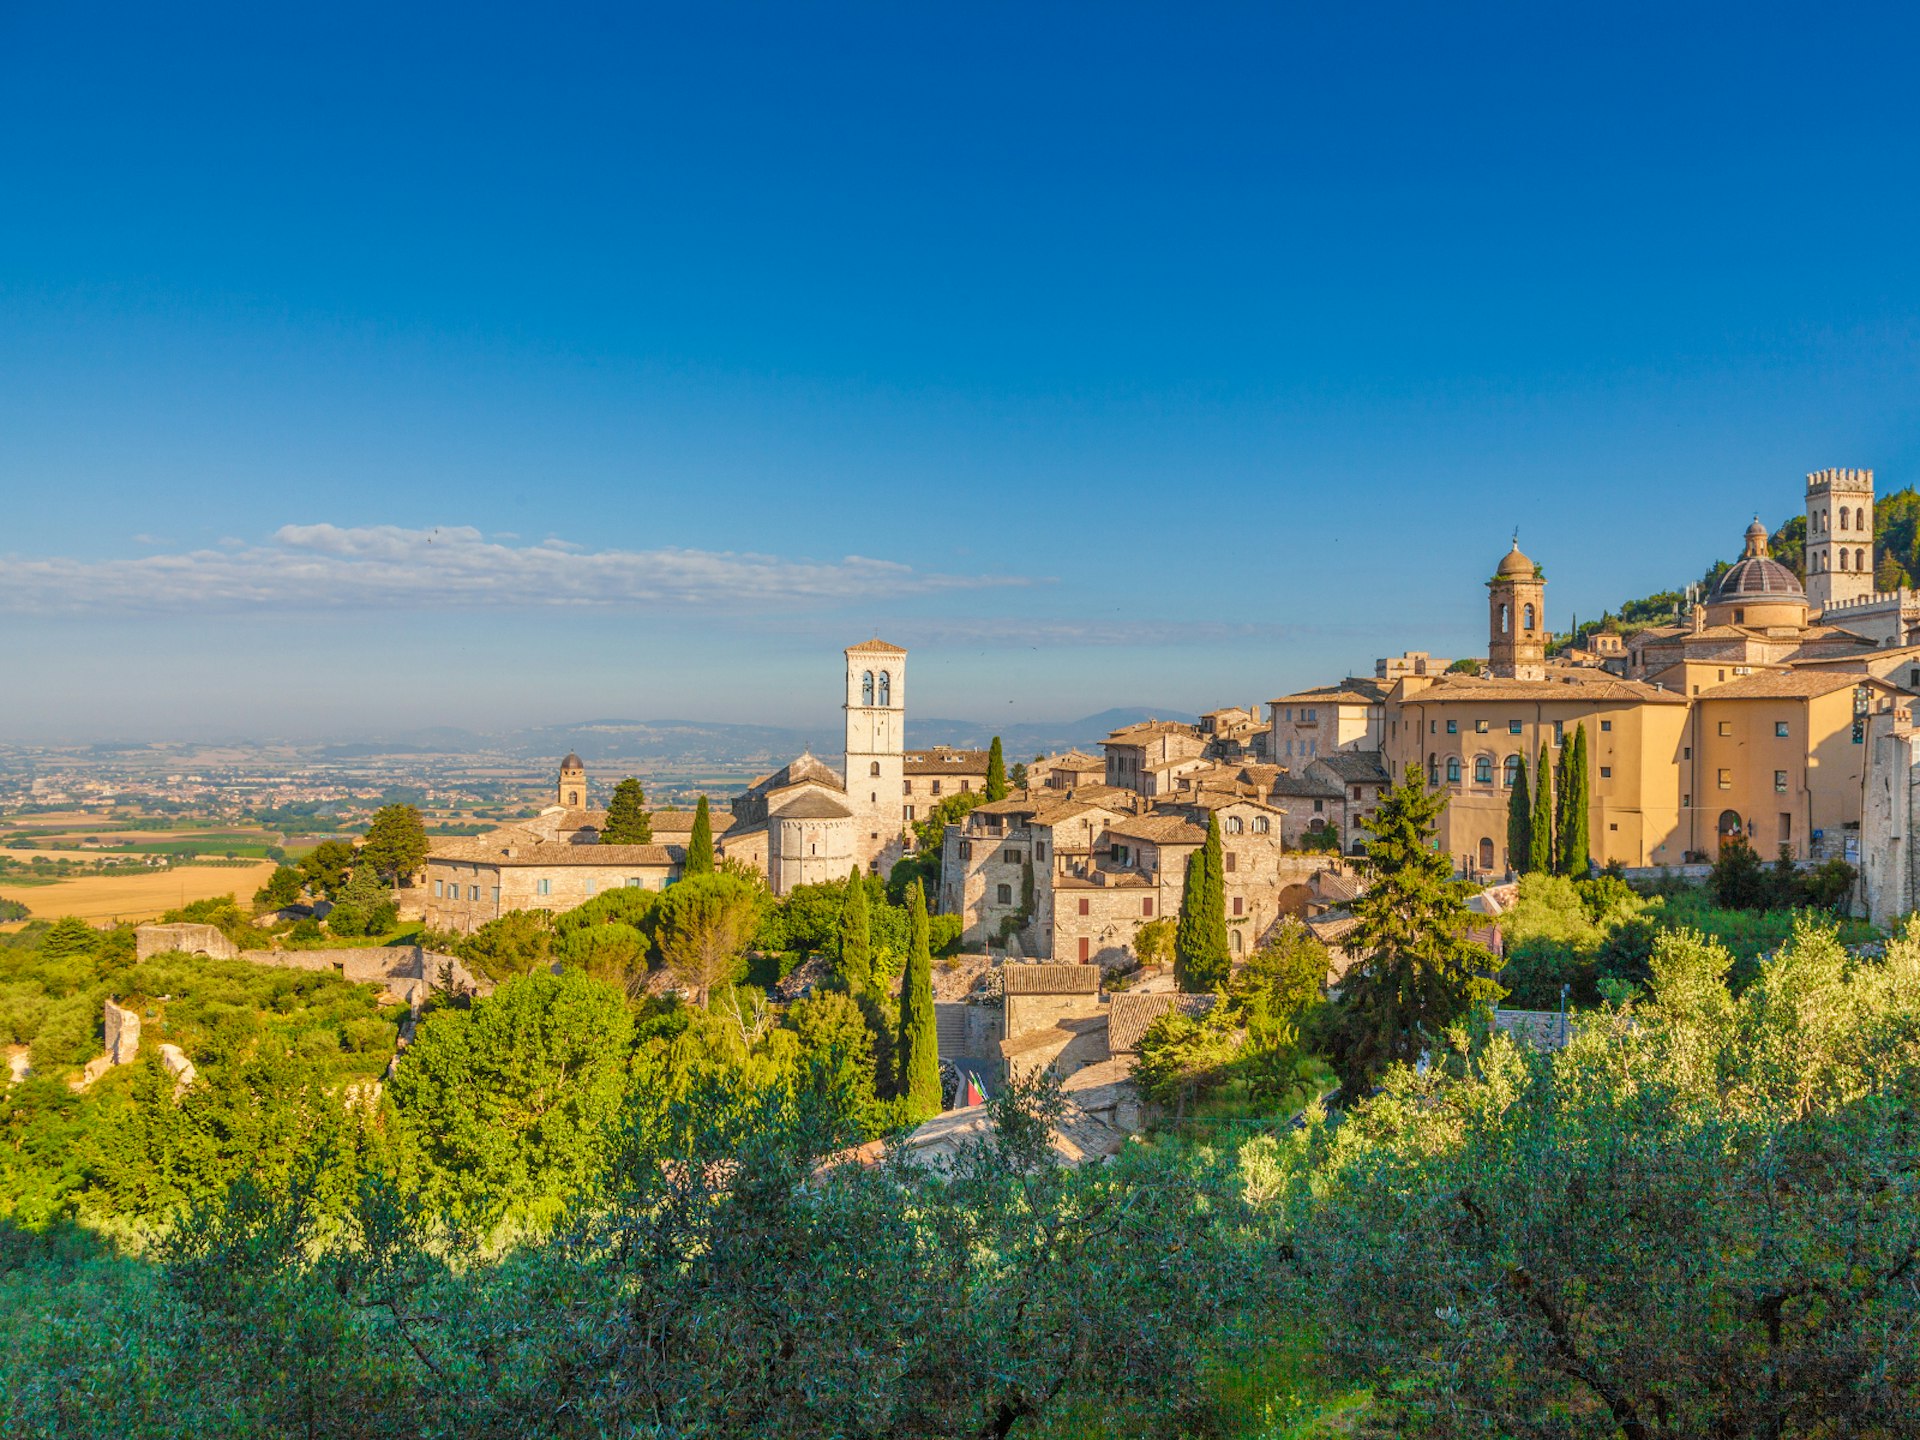 The sandstone-coloured buildings of Assisi glow in the sunshine, with a clear blue sky behind and countryside in the distance